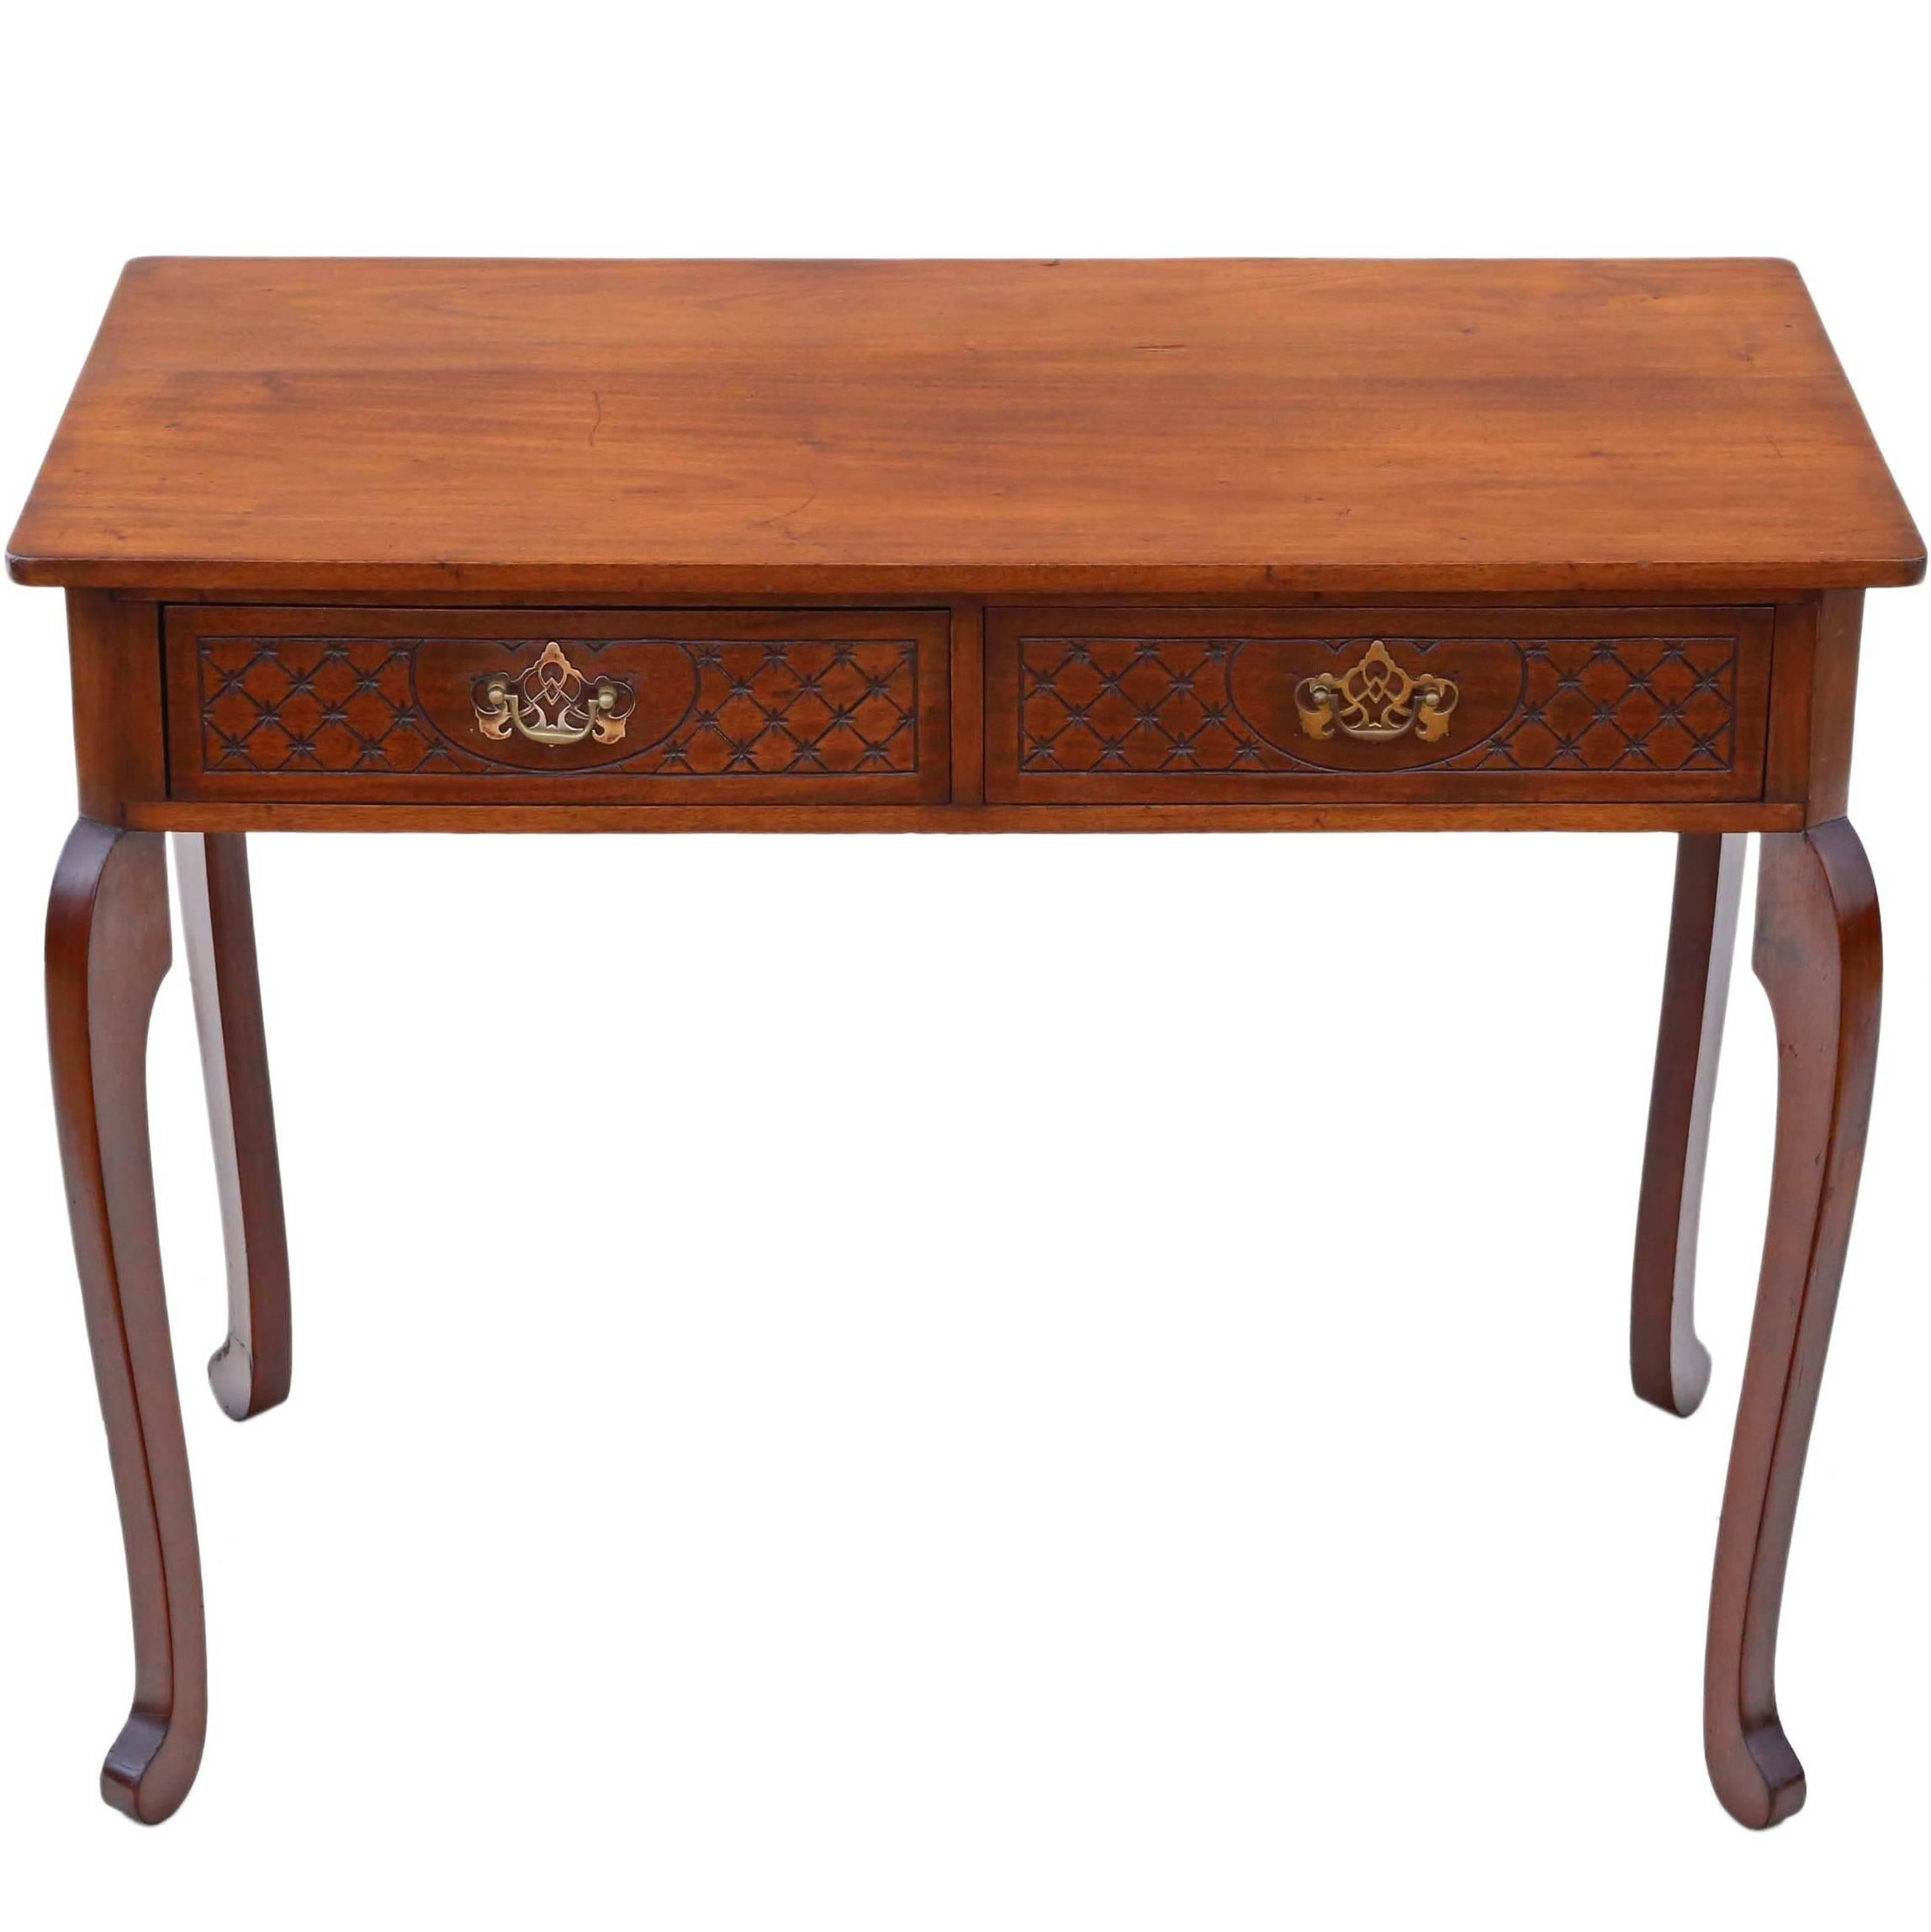 Antique Victorian Aesthetic circa 1900 Mahogany Writing Desk or Dressing Table For Sale